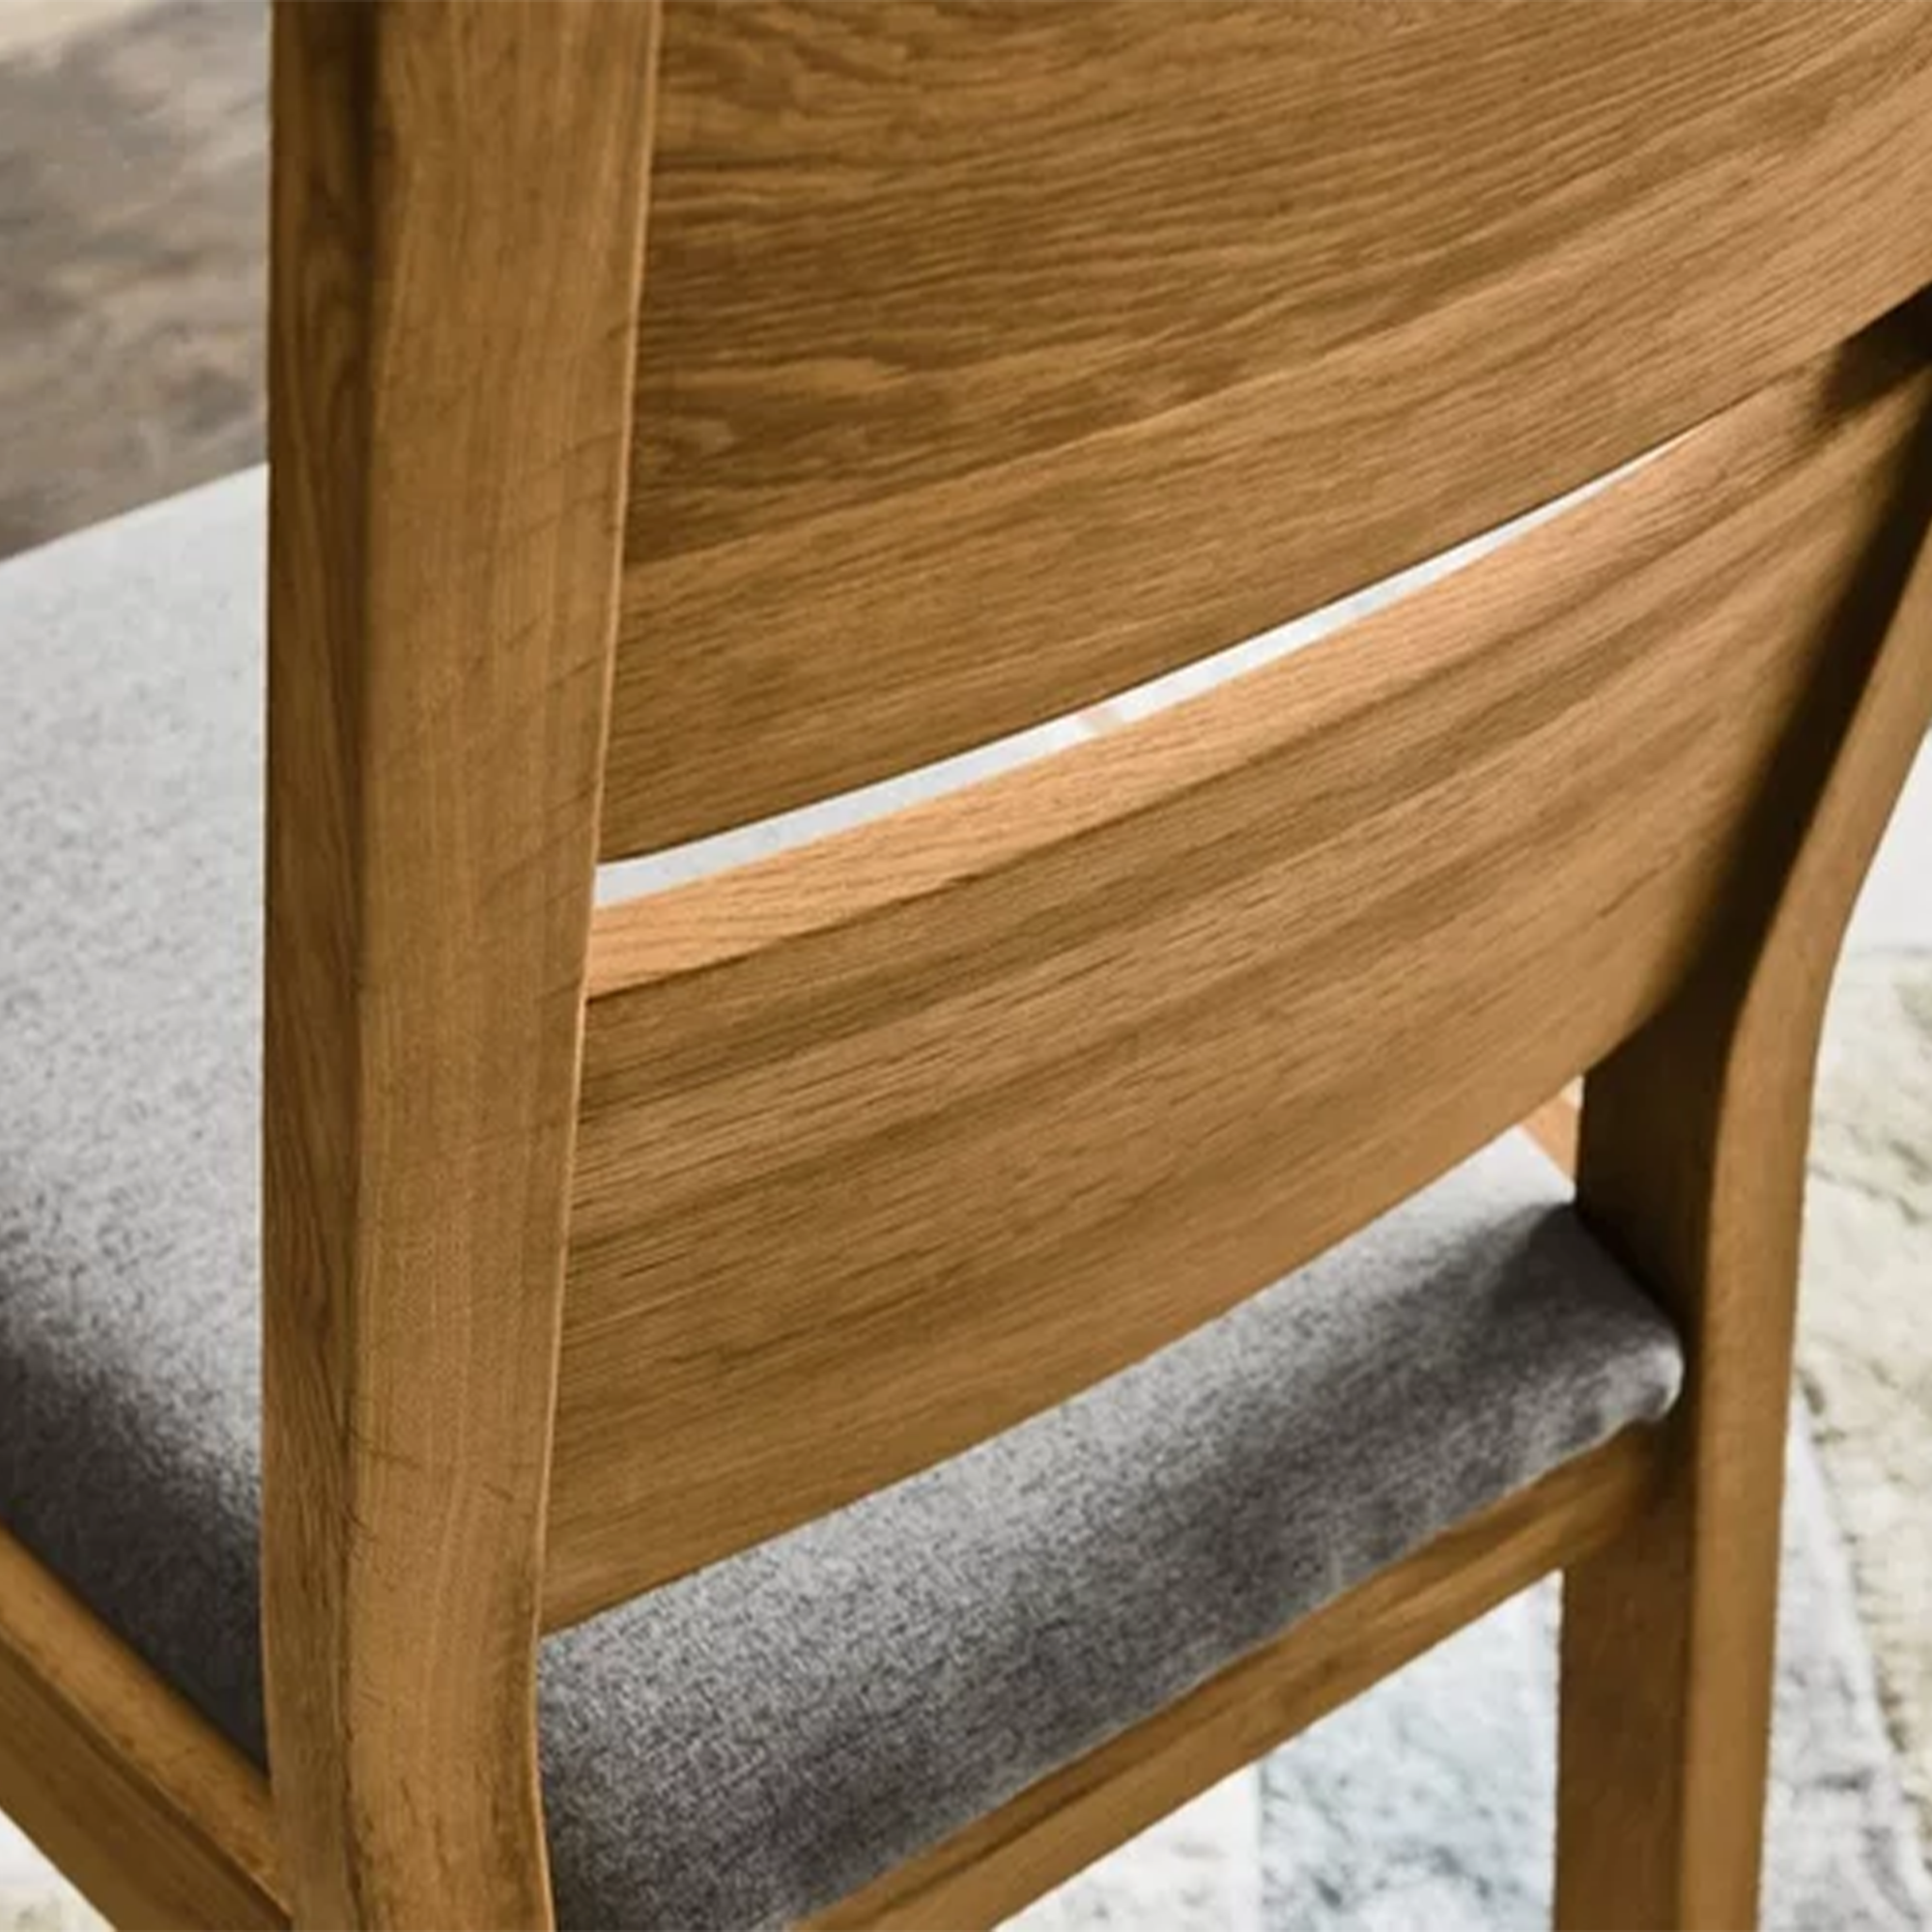 Backup Wooden Beige Accent Dining Chair